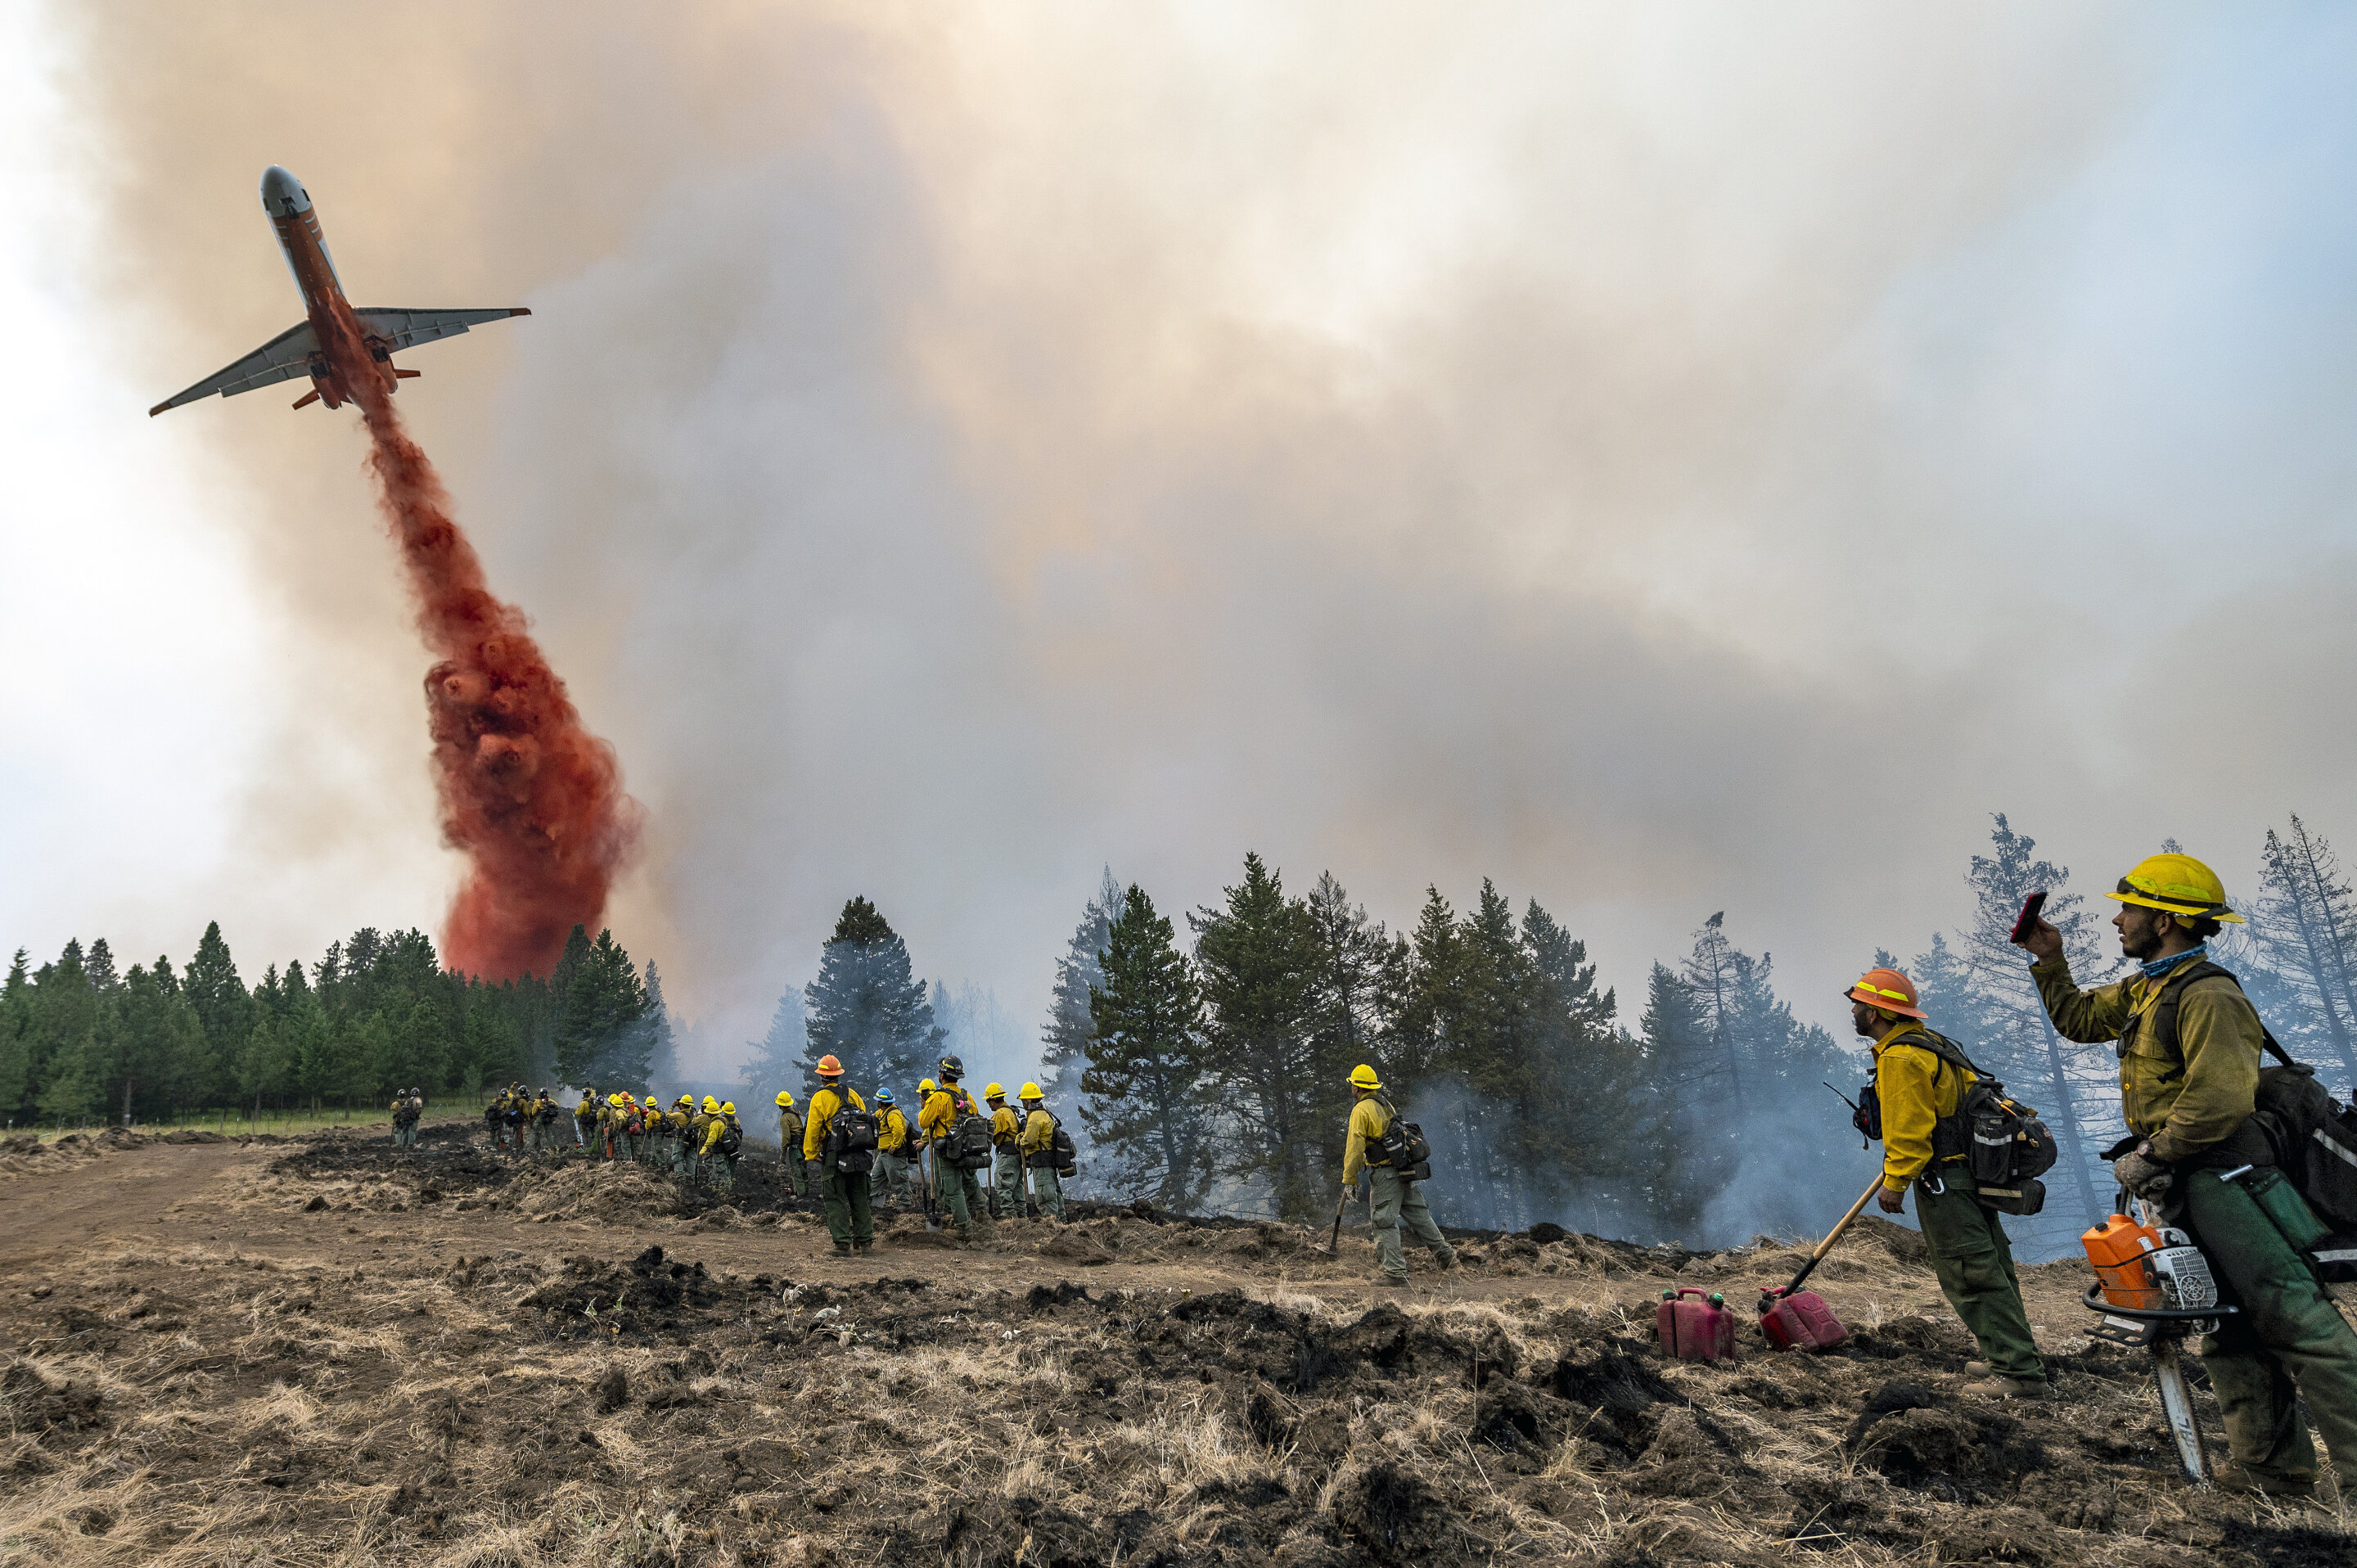 Wildfires torch homes, land across 10 states in US West pic